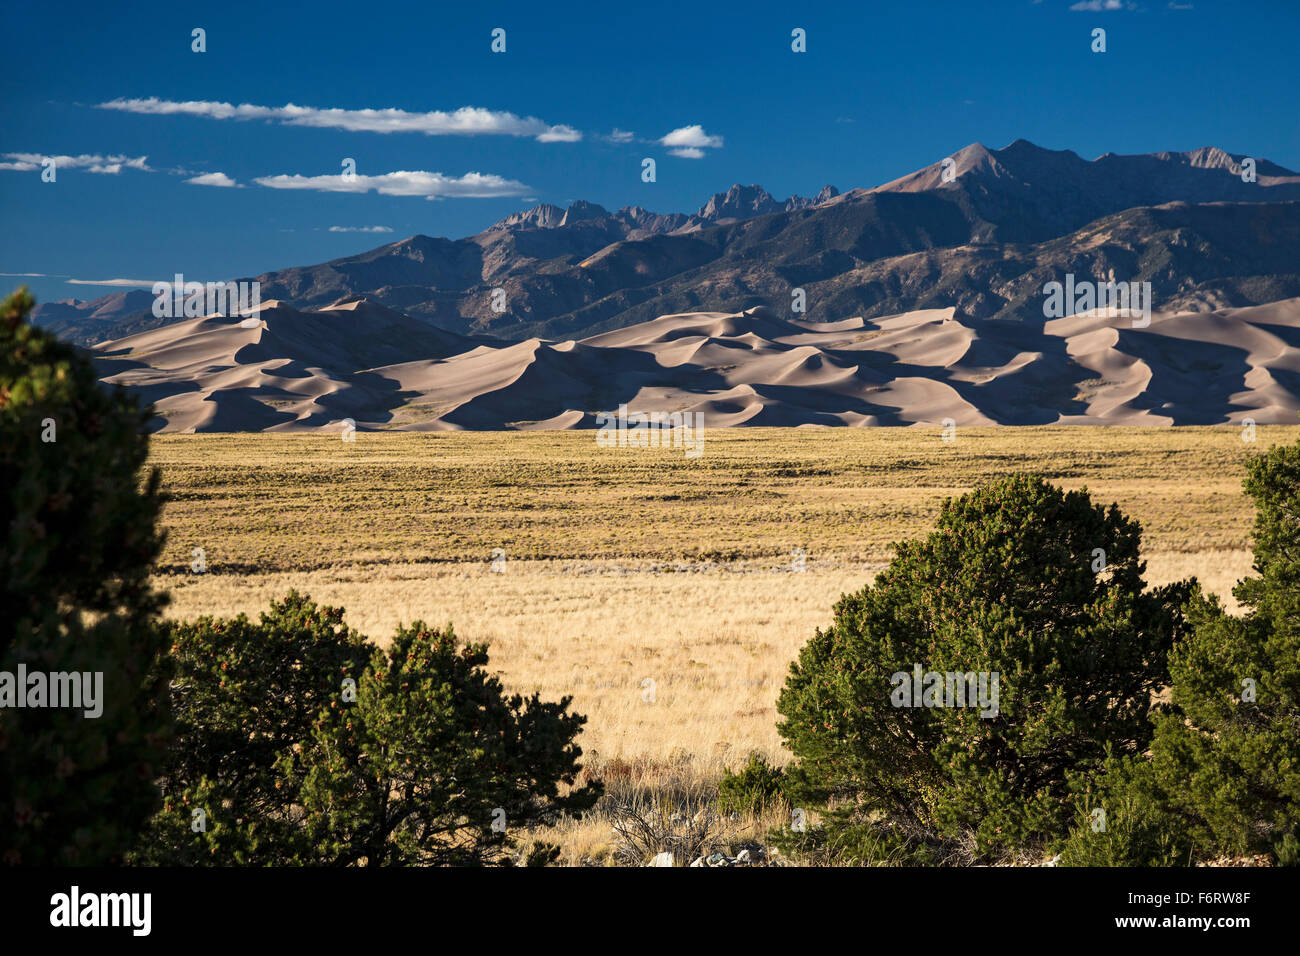 Mosca, Colorado - Great Sand Dunes National Park and Preserve. Stock Photo